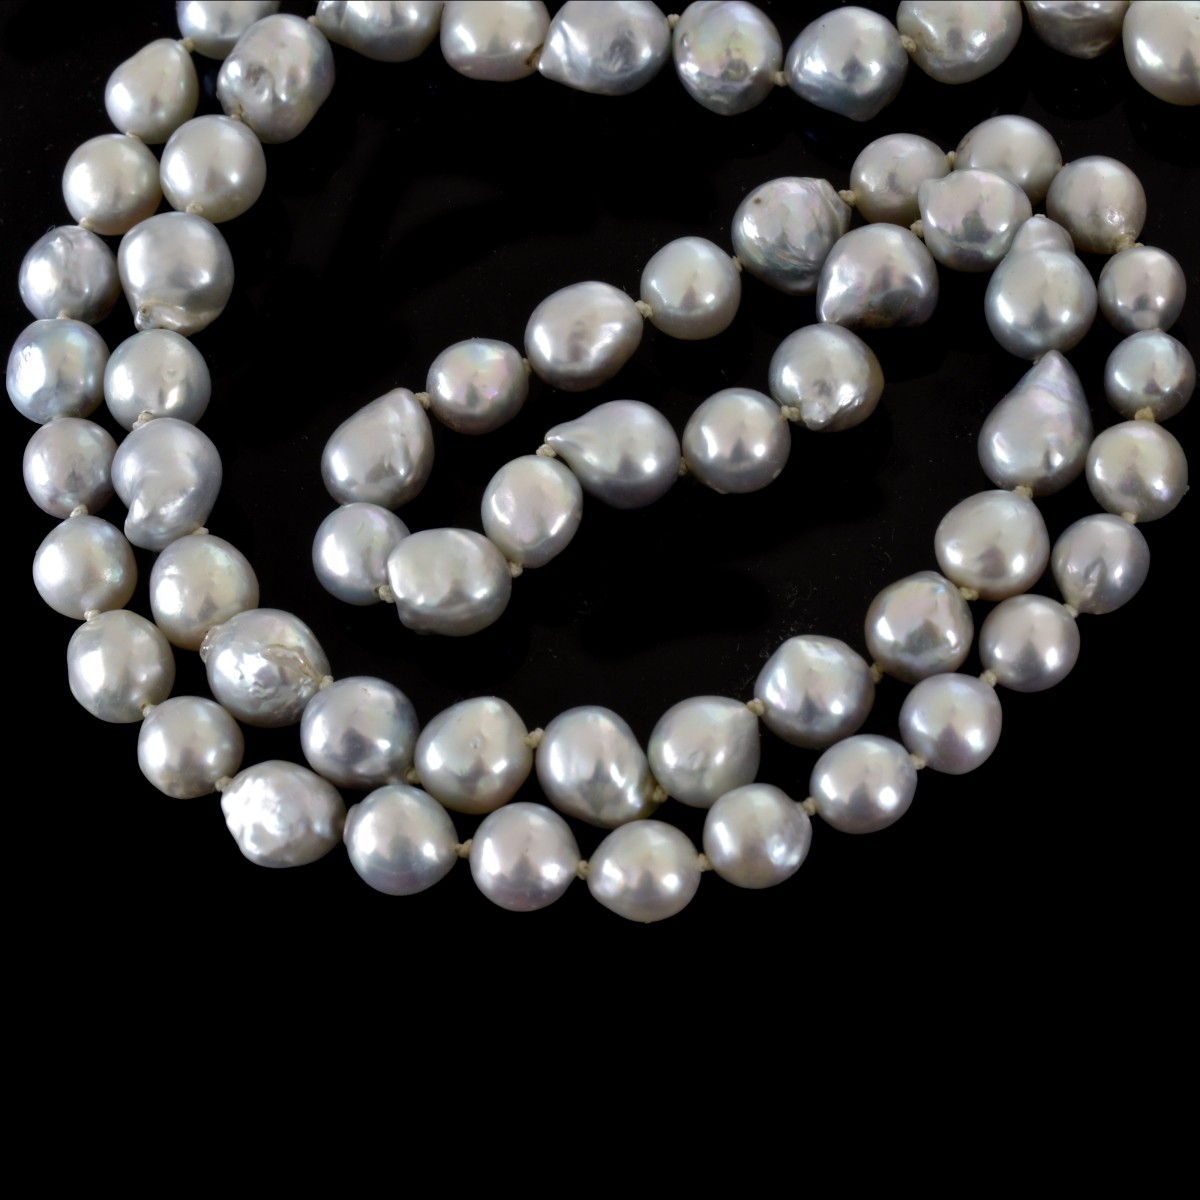 Grey Pearl Necklace and Earrings